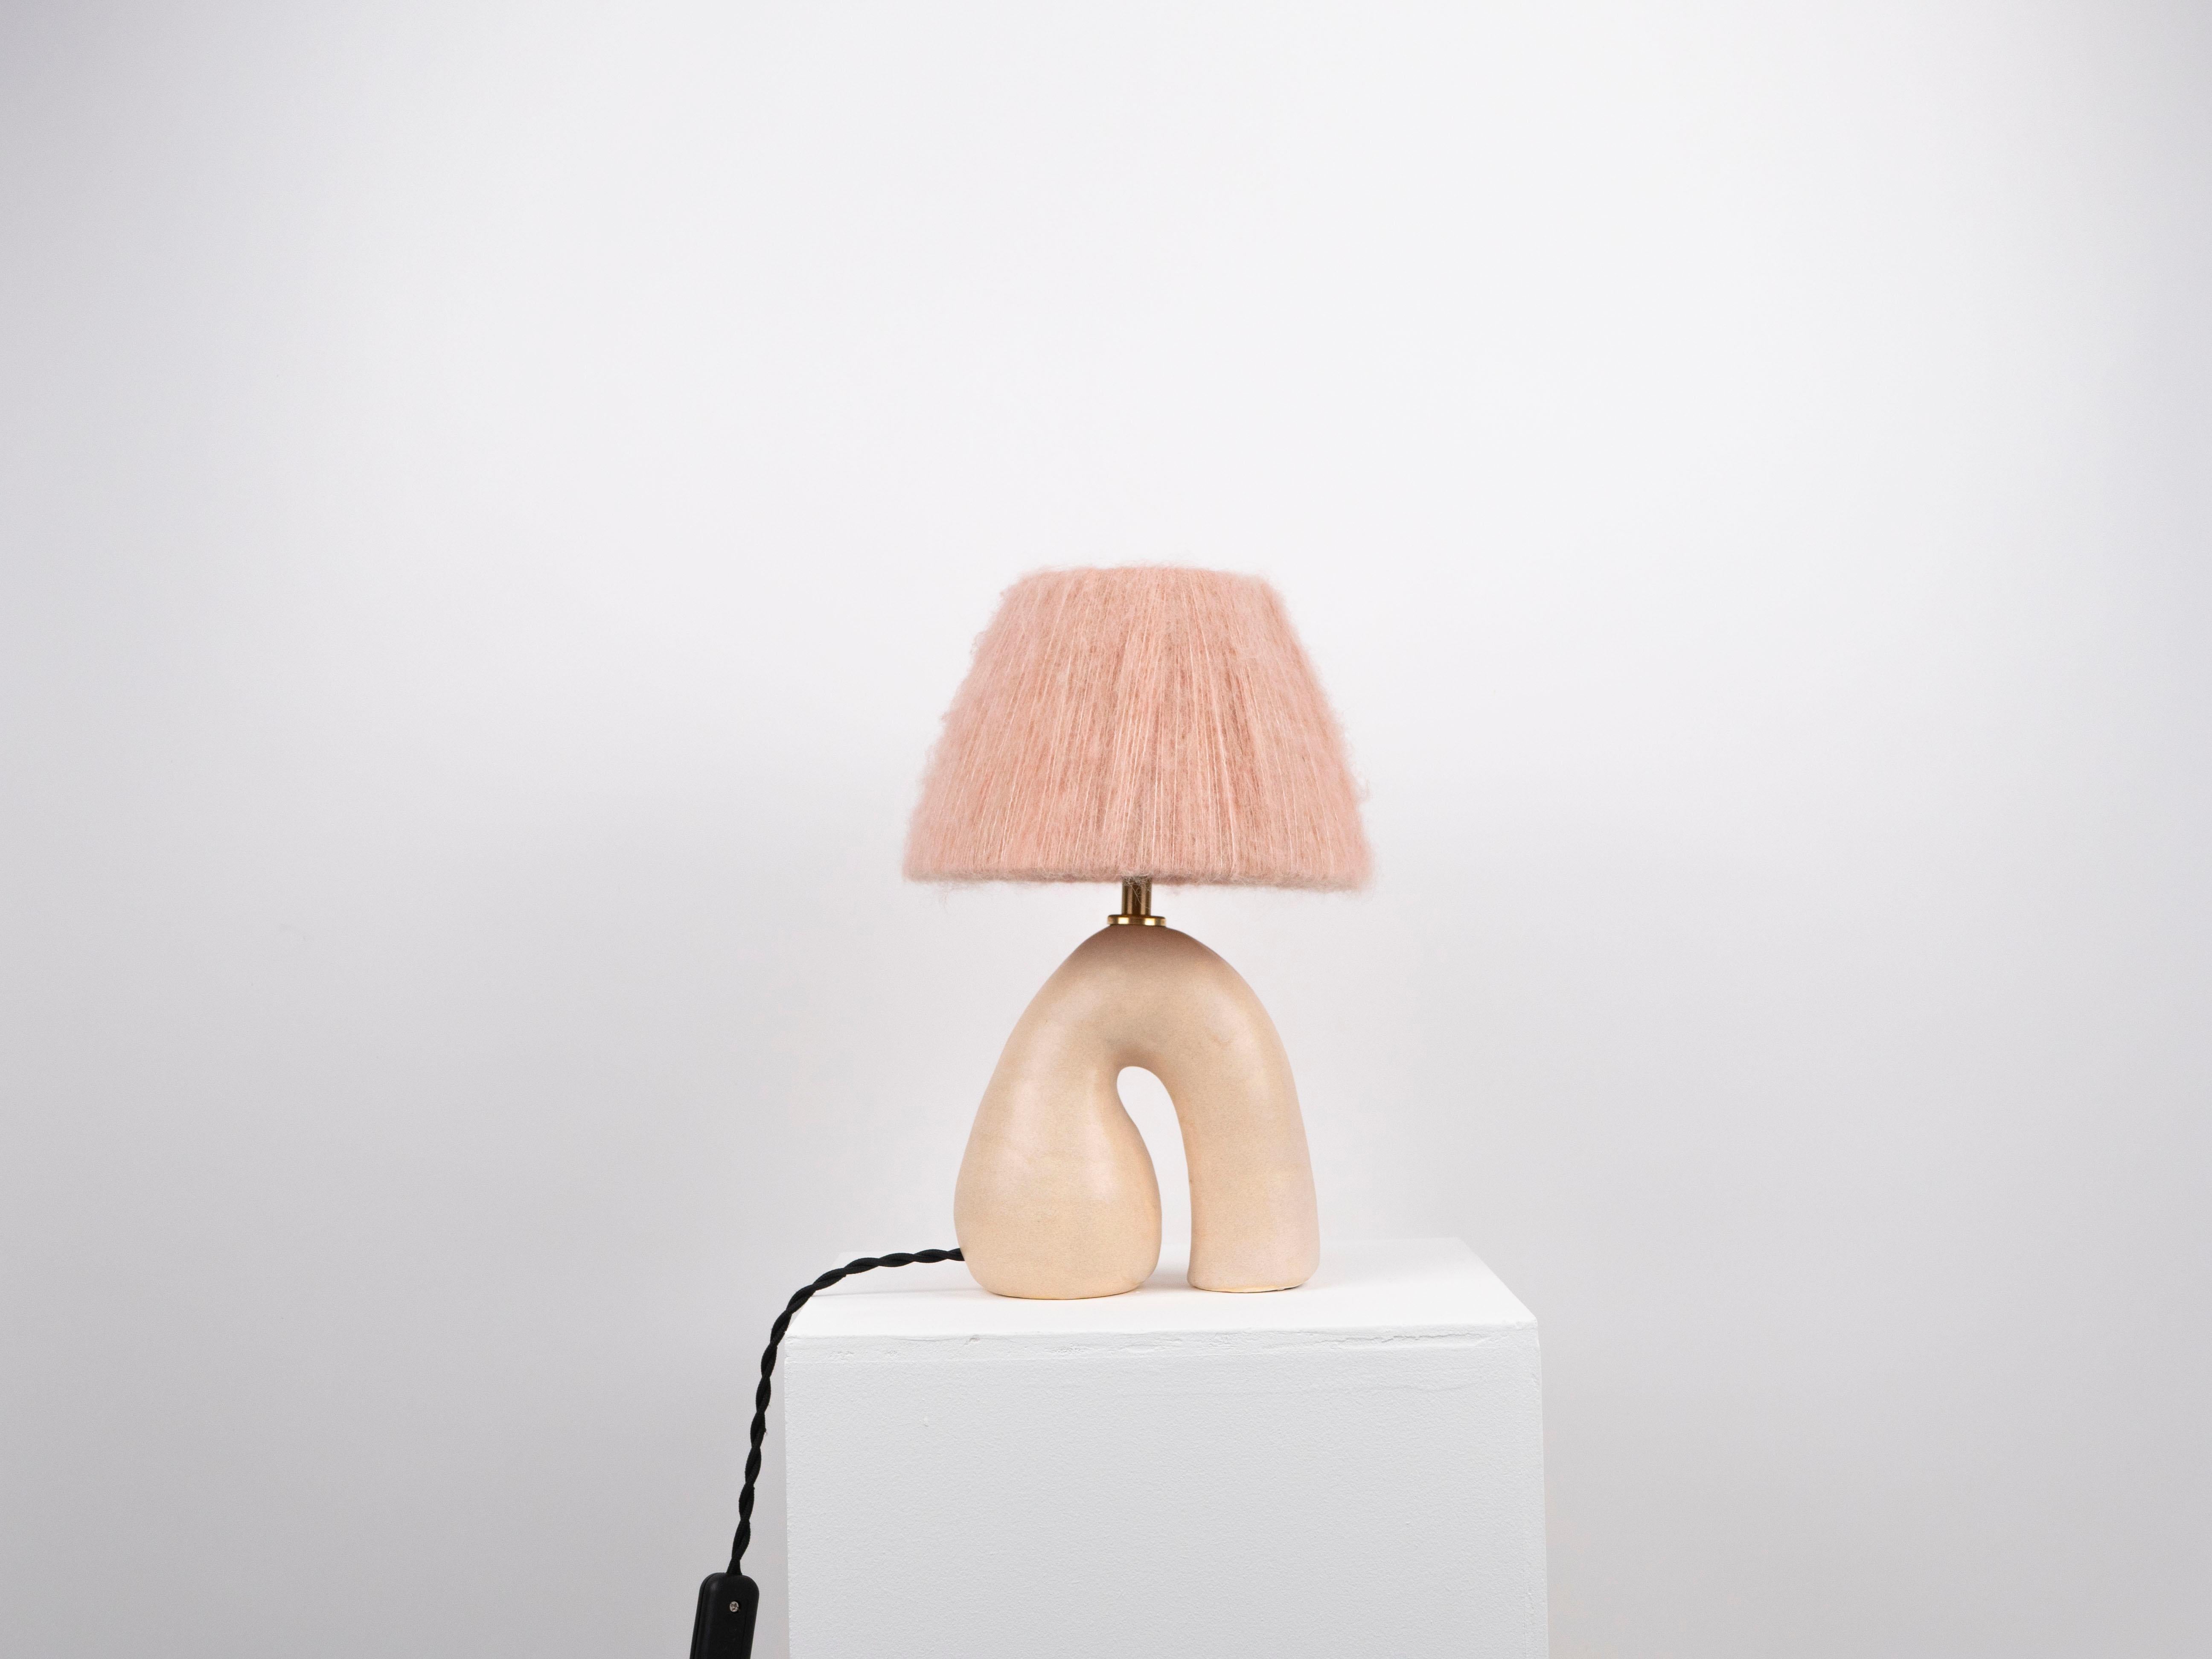 Cream Base with a Satin finish and Pink Wool Shade

Estimated processing time is 2 weeks from order confirmation

Pictured with a Mini Globe LED E27 Bulb. Bulb not included

To pair this base with a shade in an alternative colour or material, click